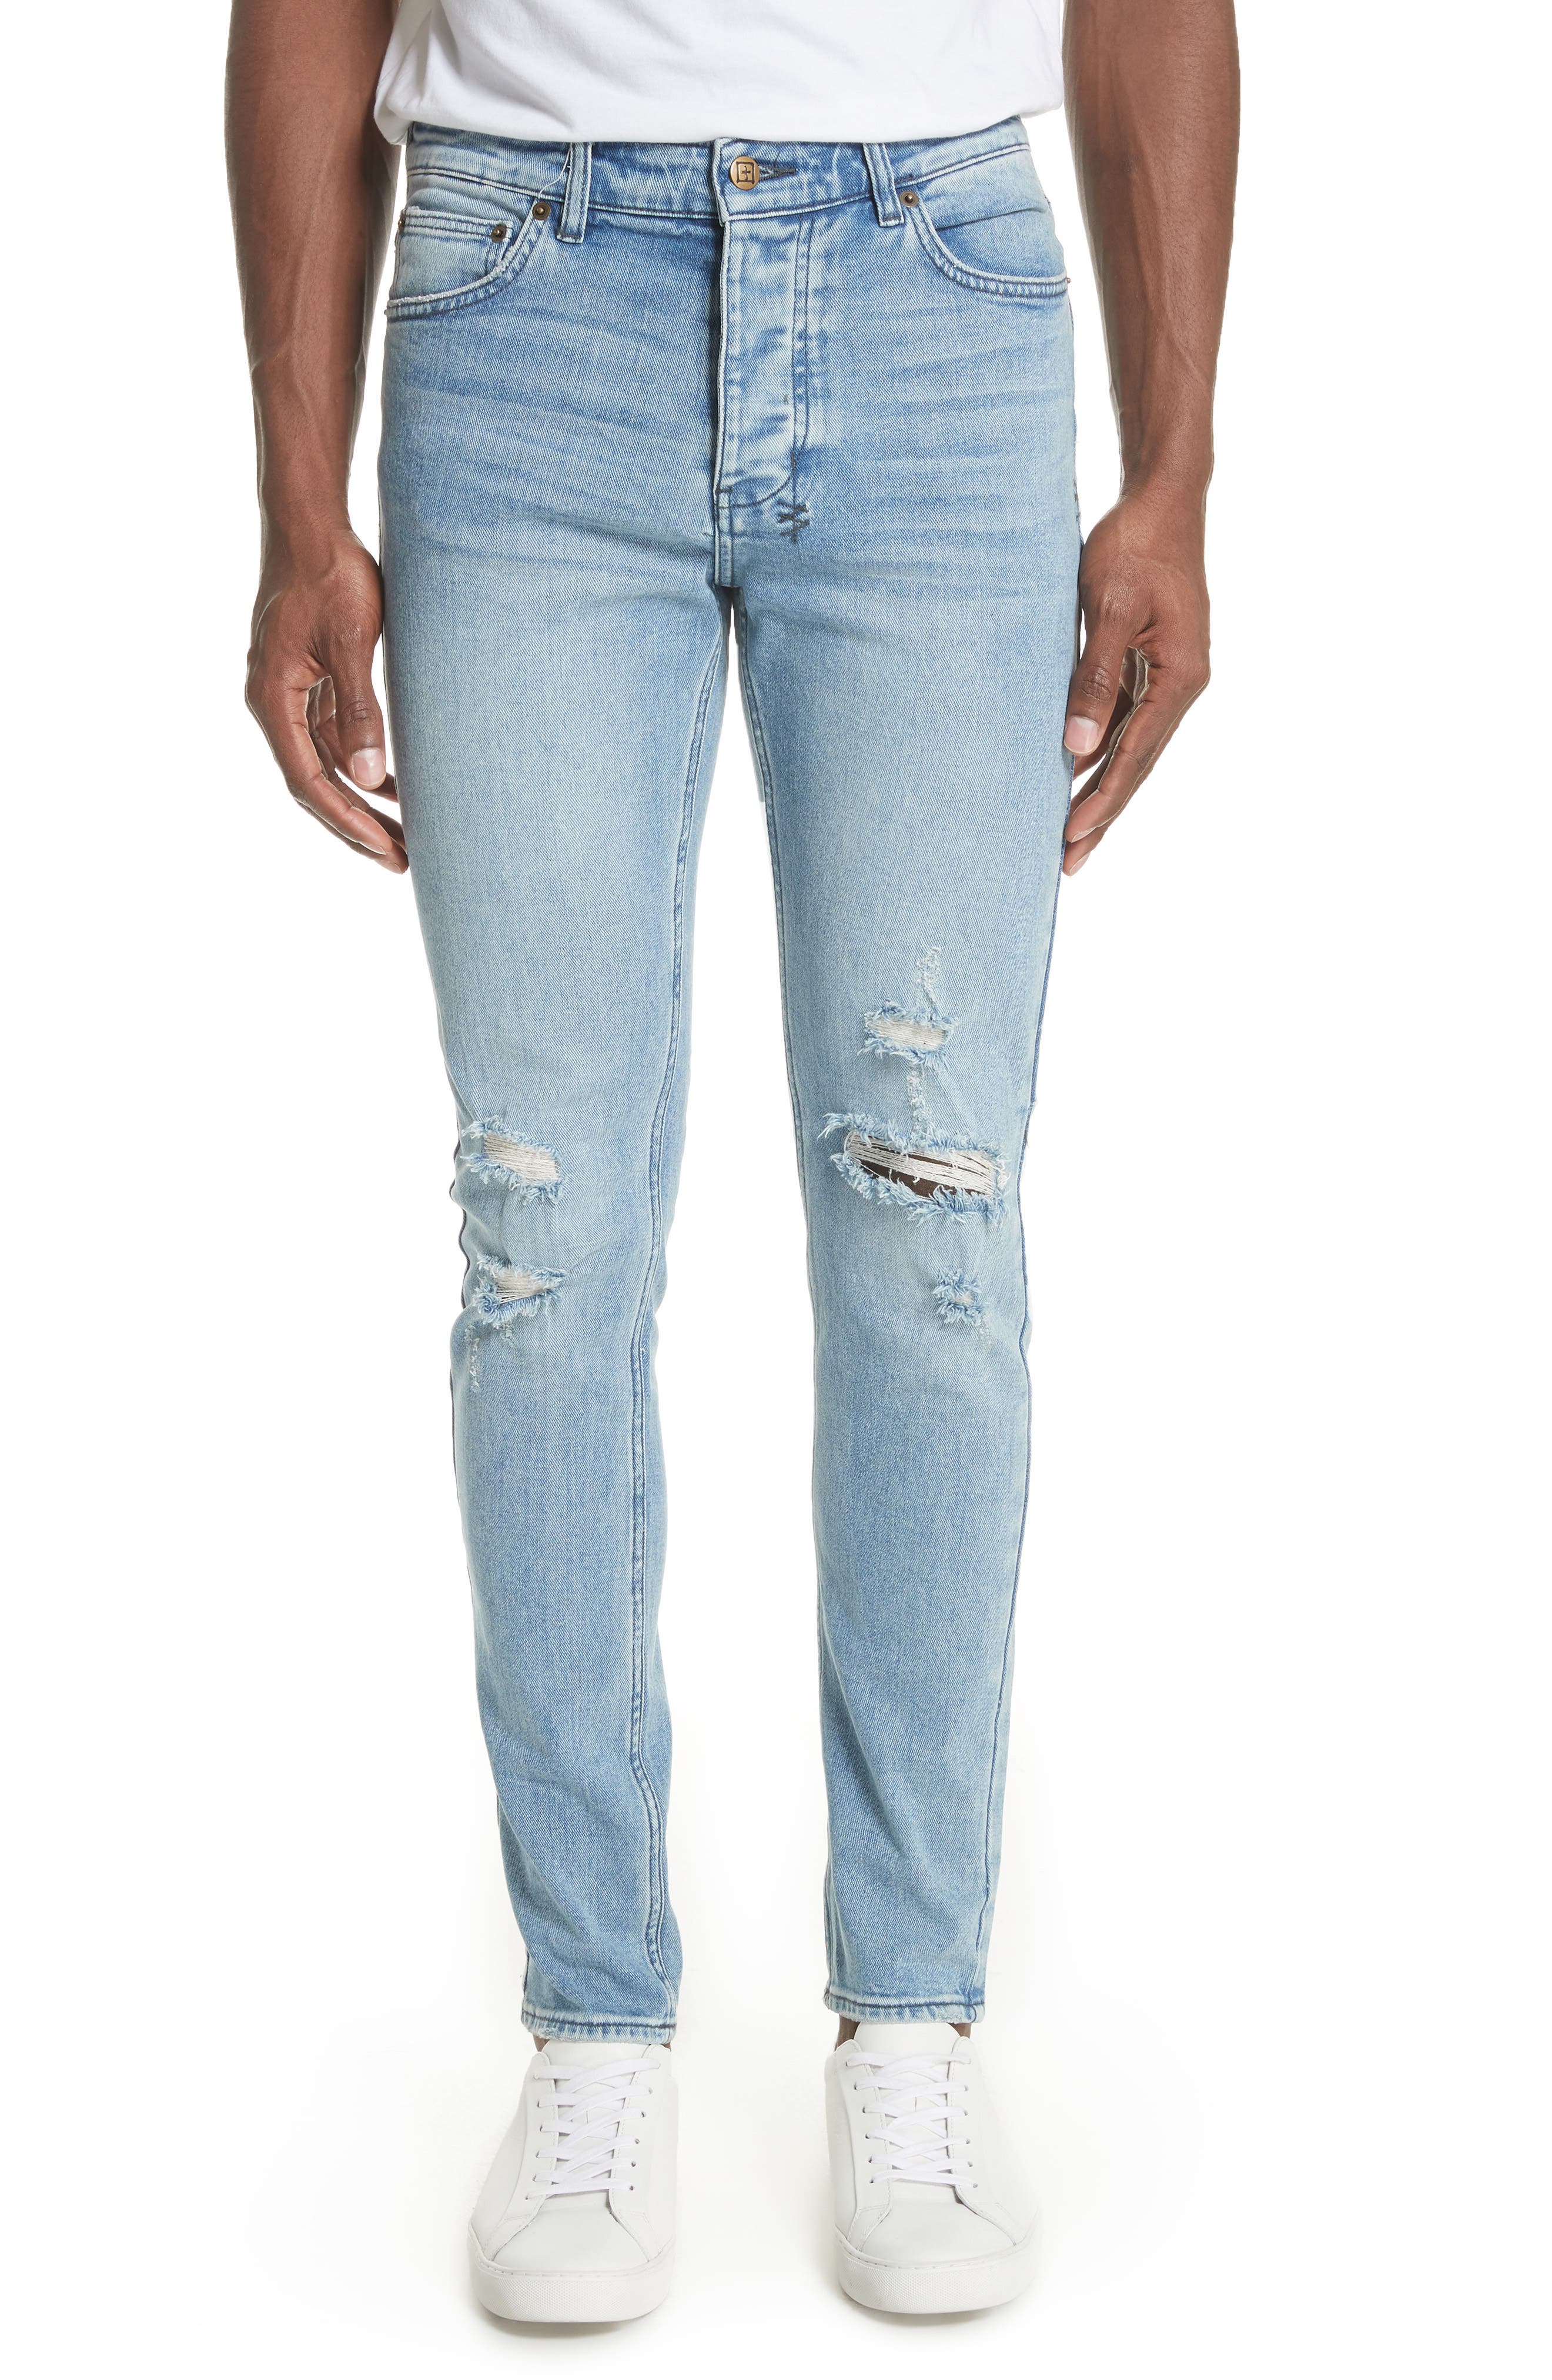 Ksubi Chitch Philly Jeans in Blue at Nordstrom, Size 28 Us